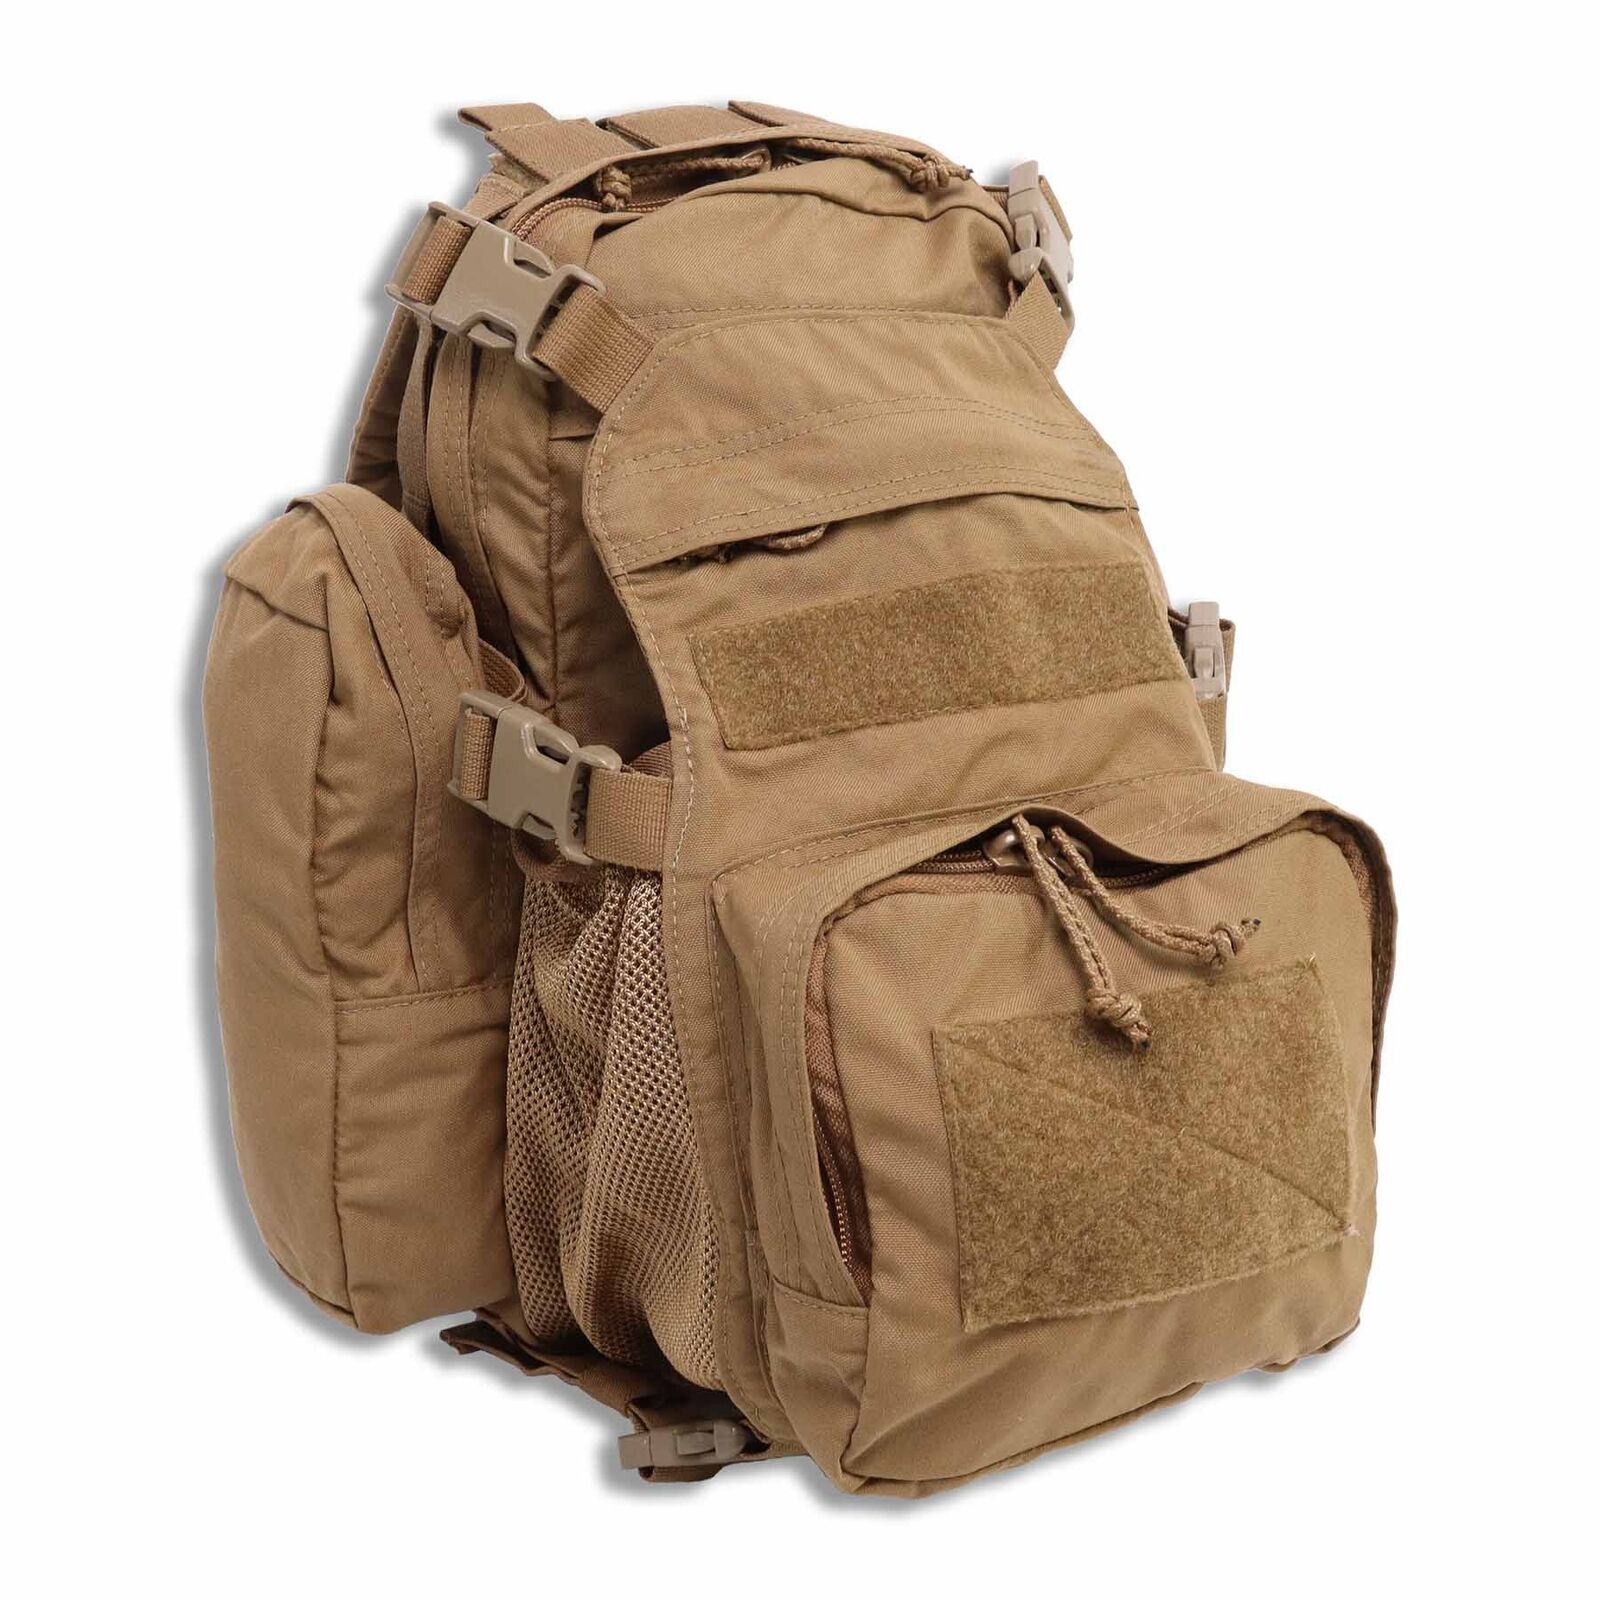 NEW T3 Gear Hans Backpack - Coyote Brown